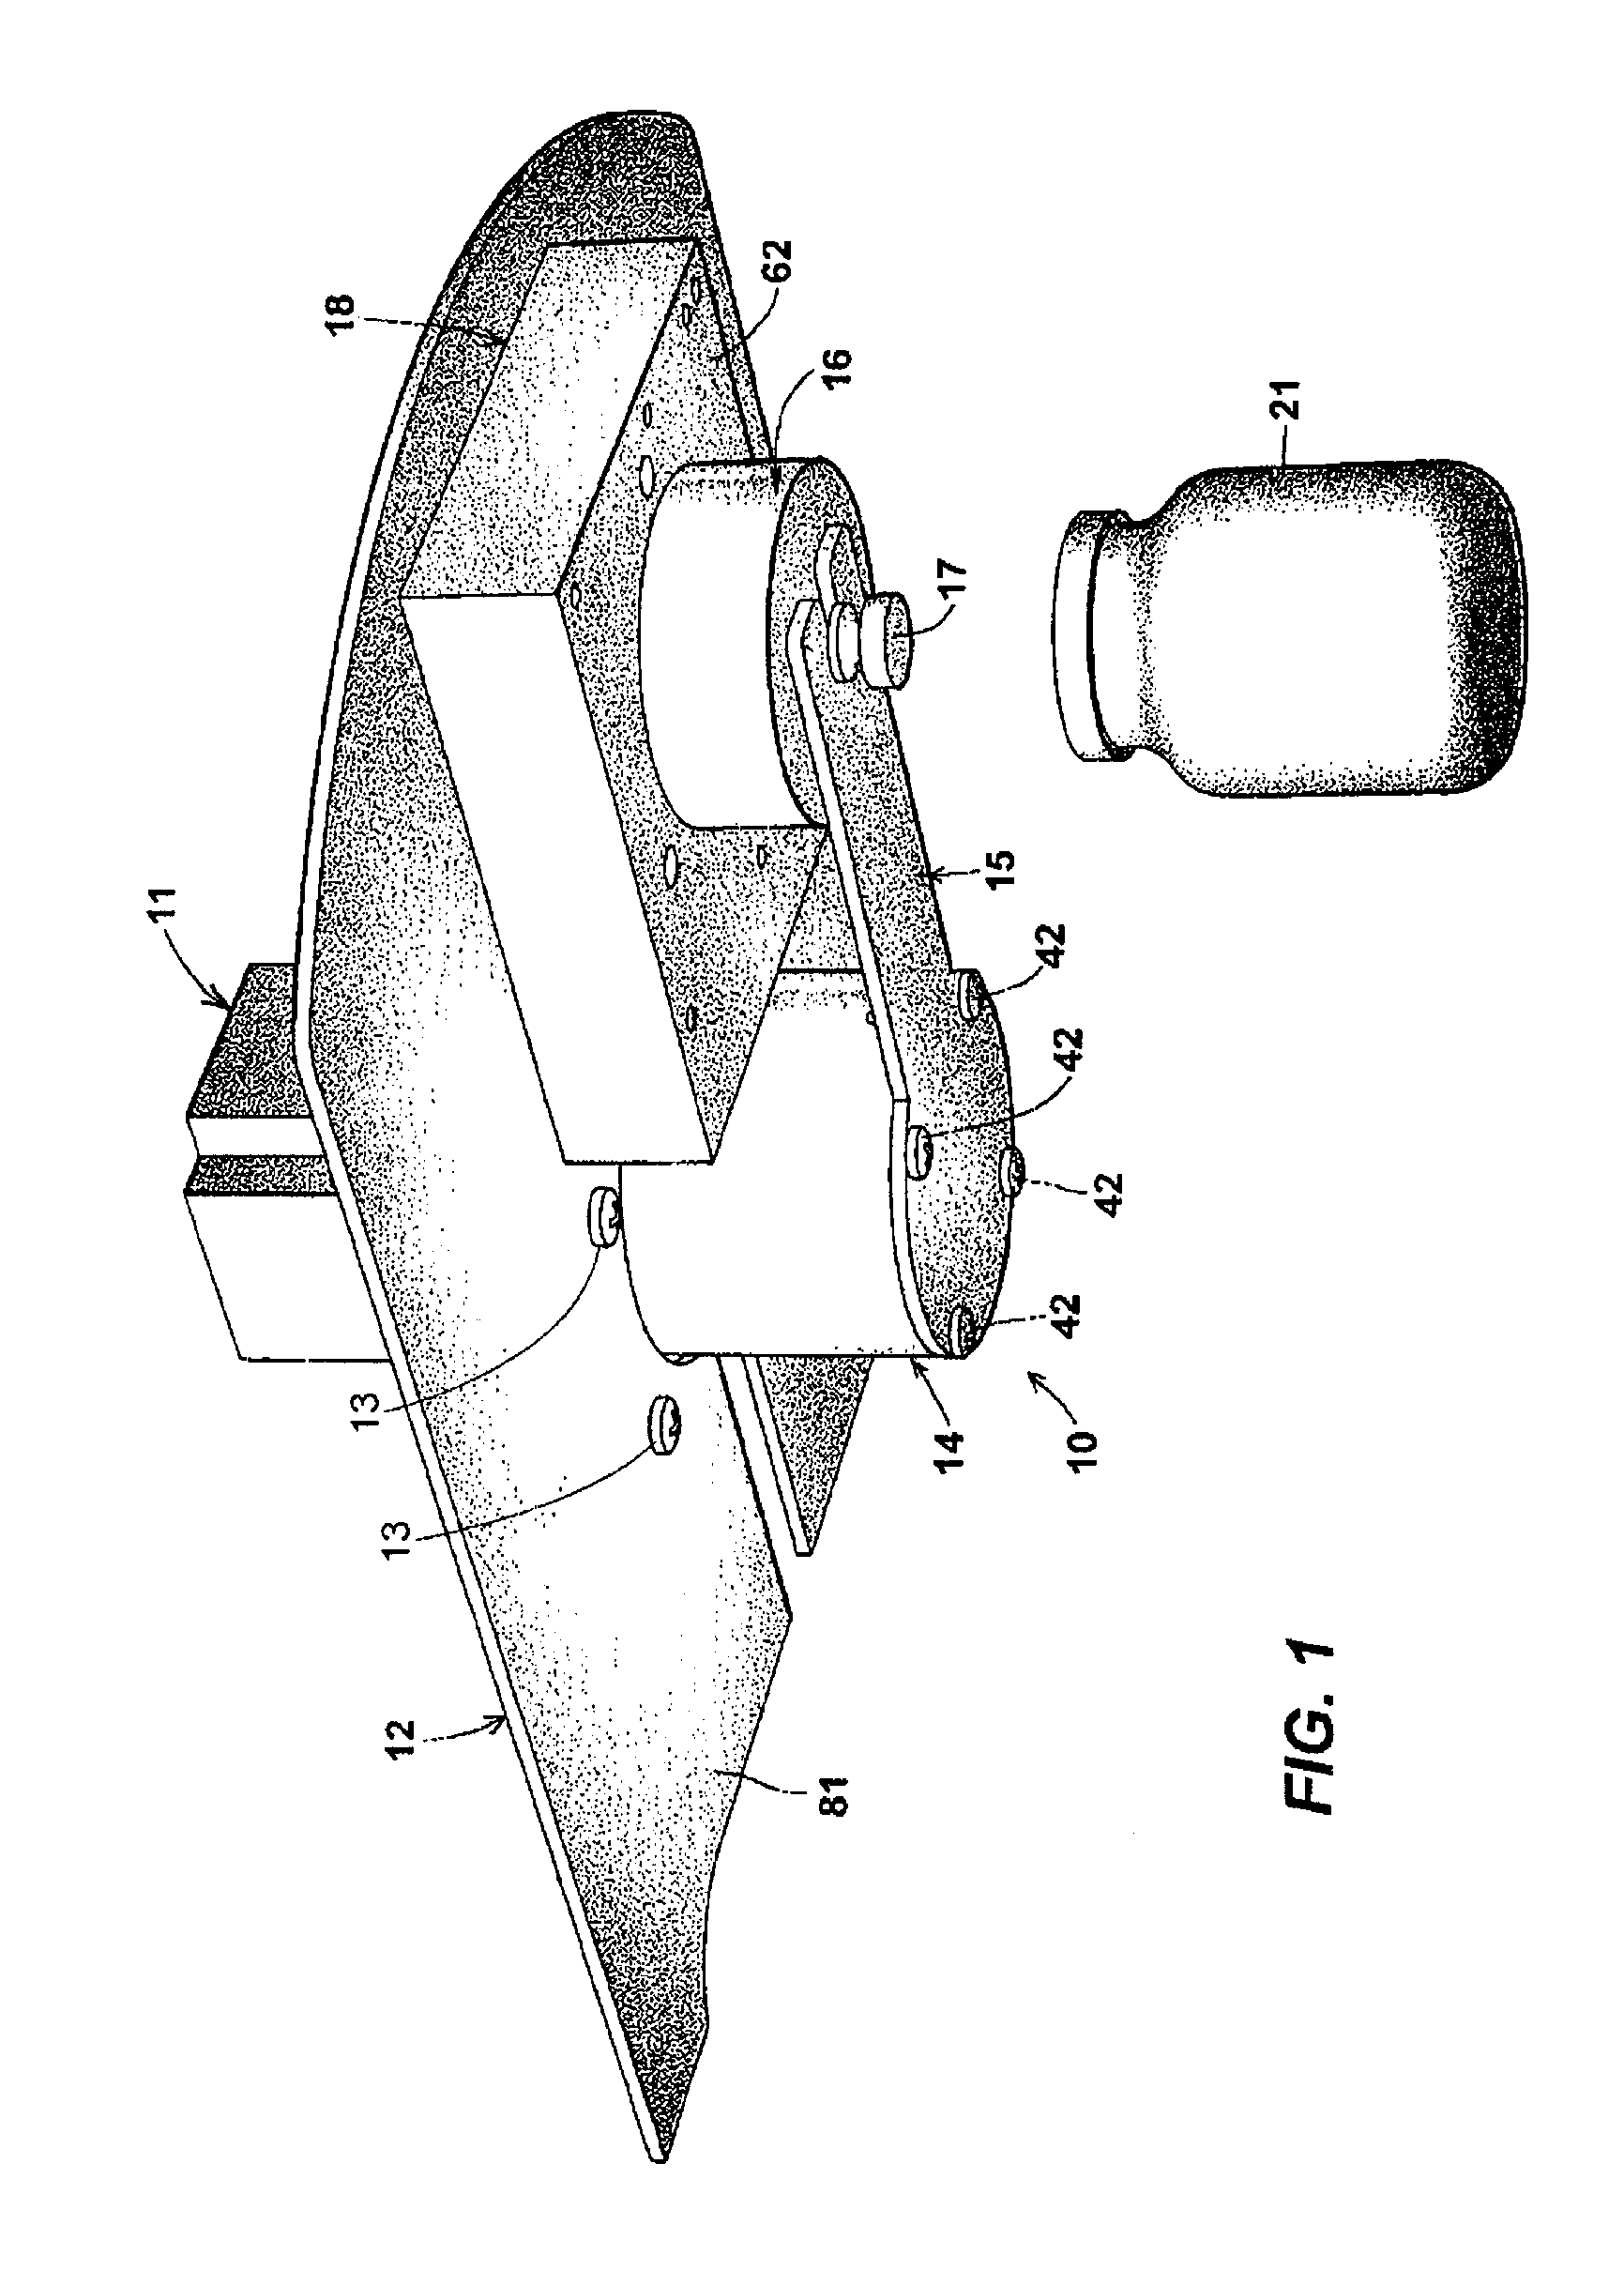 Articulated nozzle closure for fluid dispensers